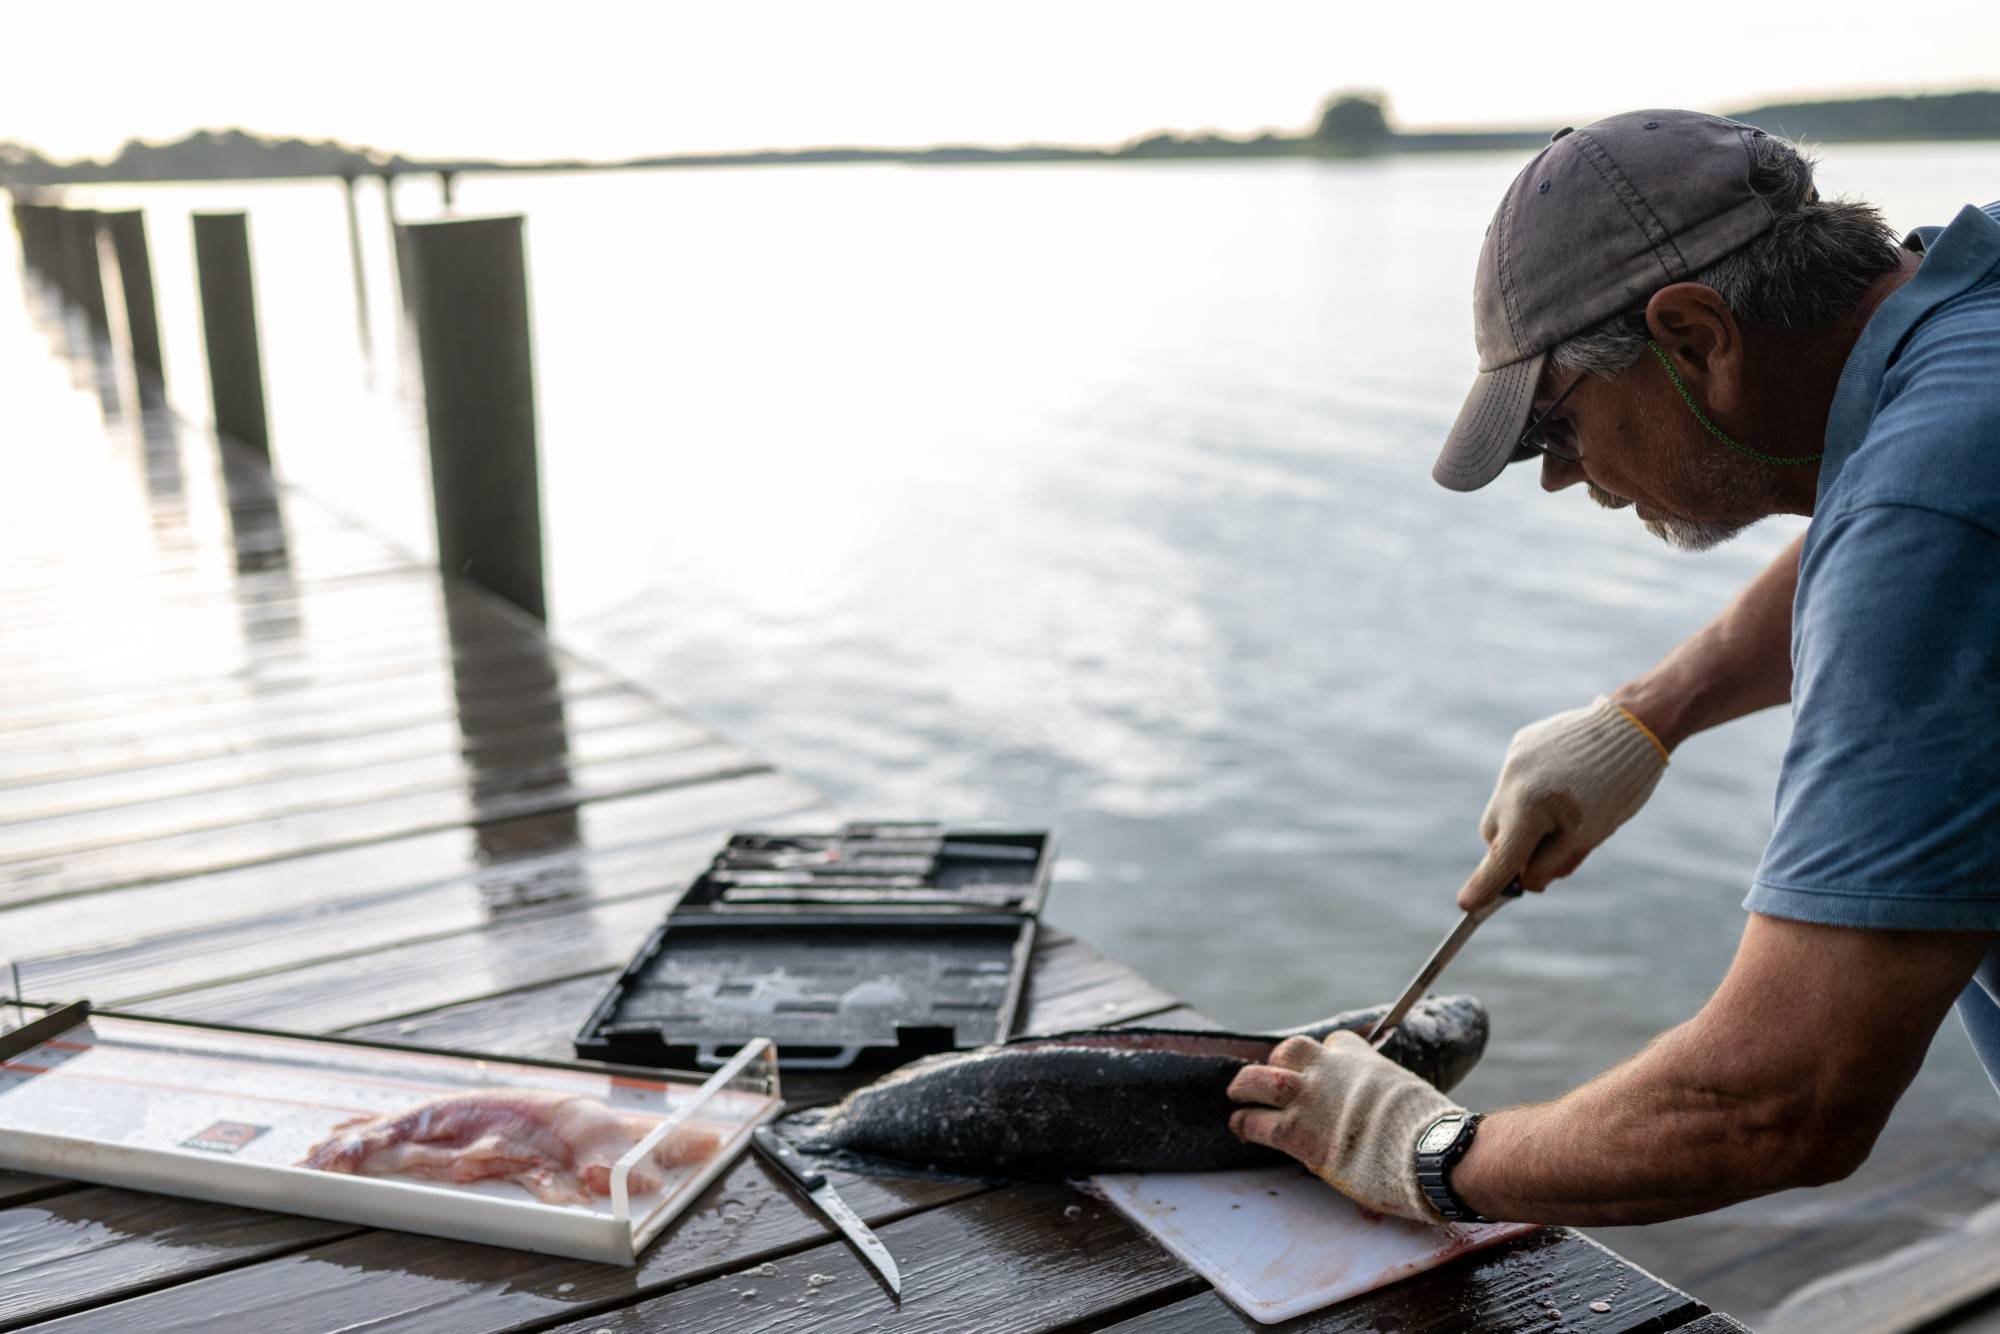 Dr. Willem Roosenberg prepares snakehead fish for dinner at the dock of his home. The fish was caught in a turtle trap on Poplar Island but research protocols prevent the team from returning the fish to the bay because it is an invasive species.